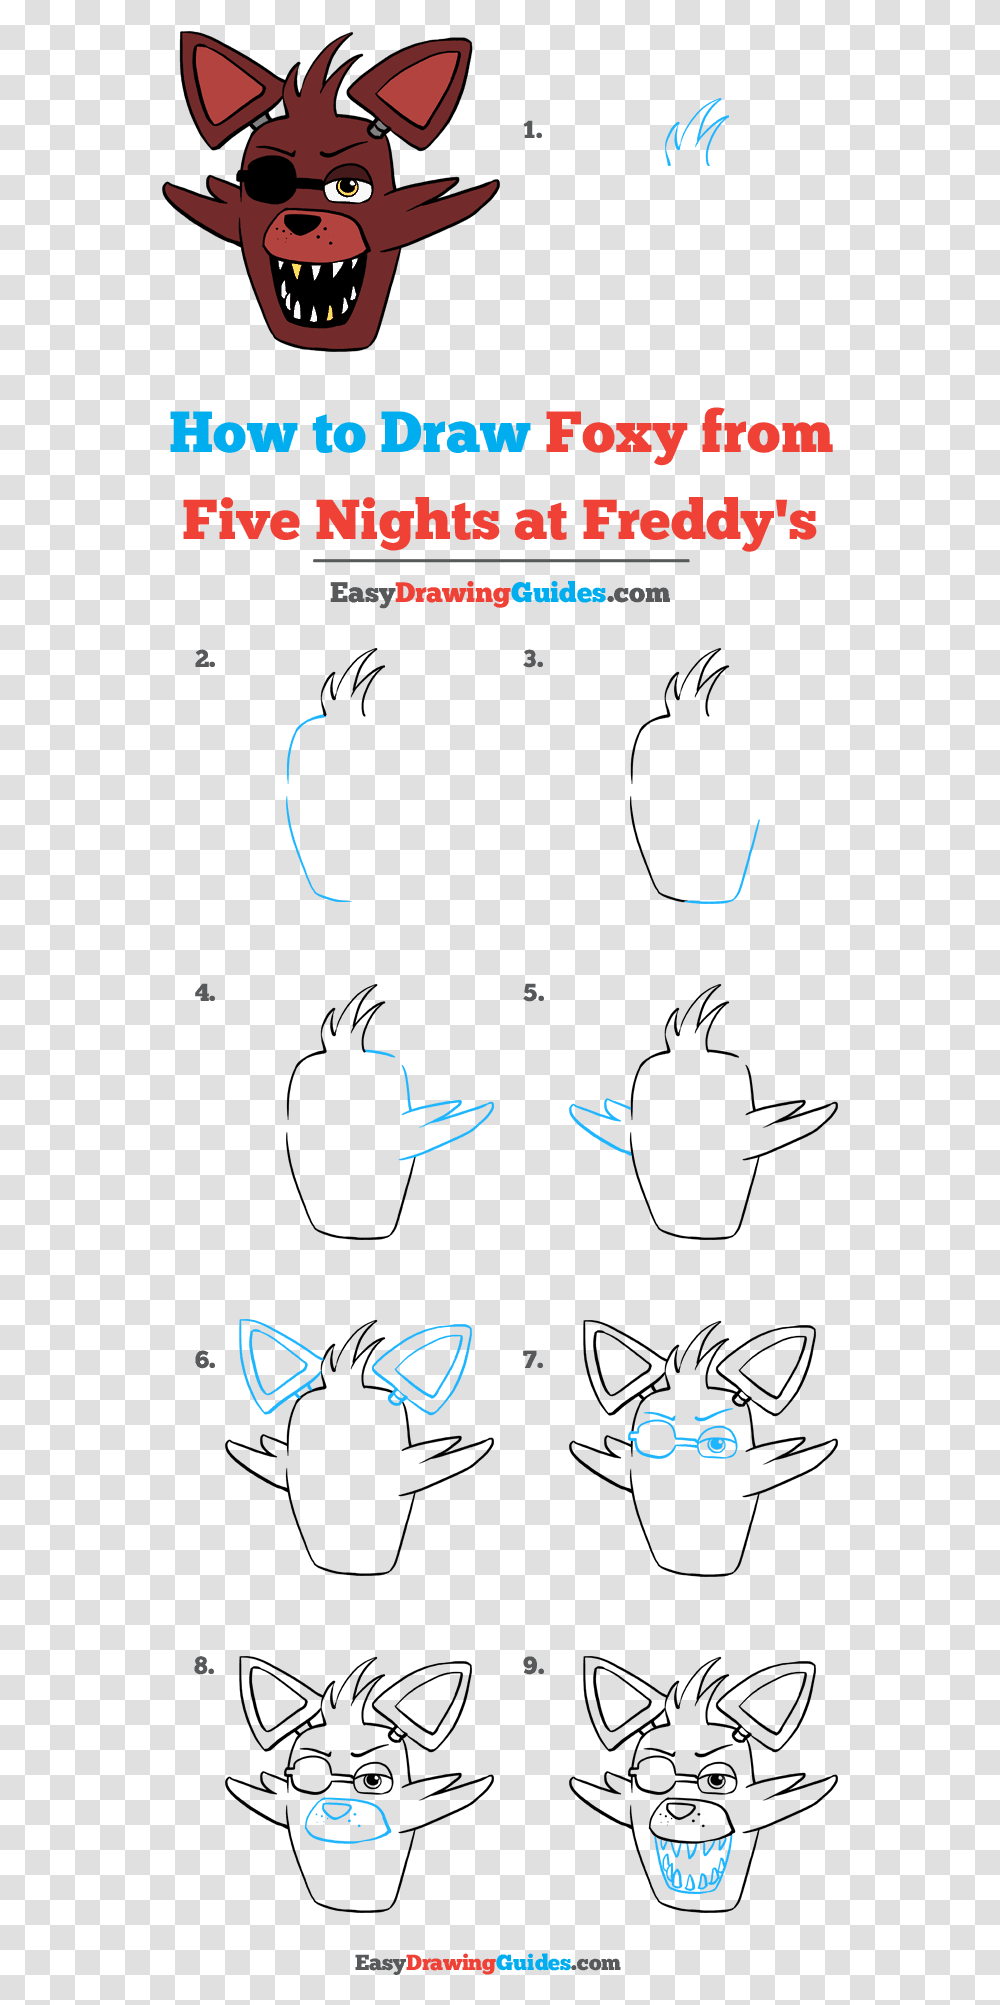 How To Draw Foxy From Five Days At Freddy S Draw Angry Birds Step By Step, Outdoors, Alphabet, White Board Transparent Png